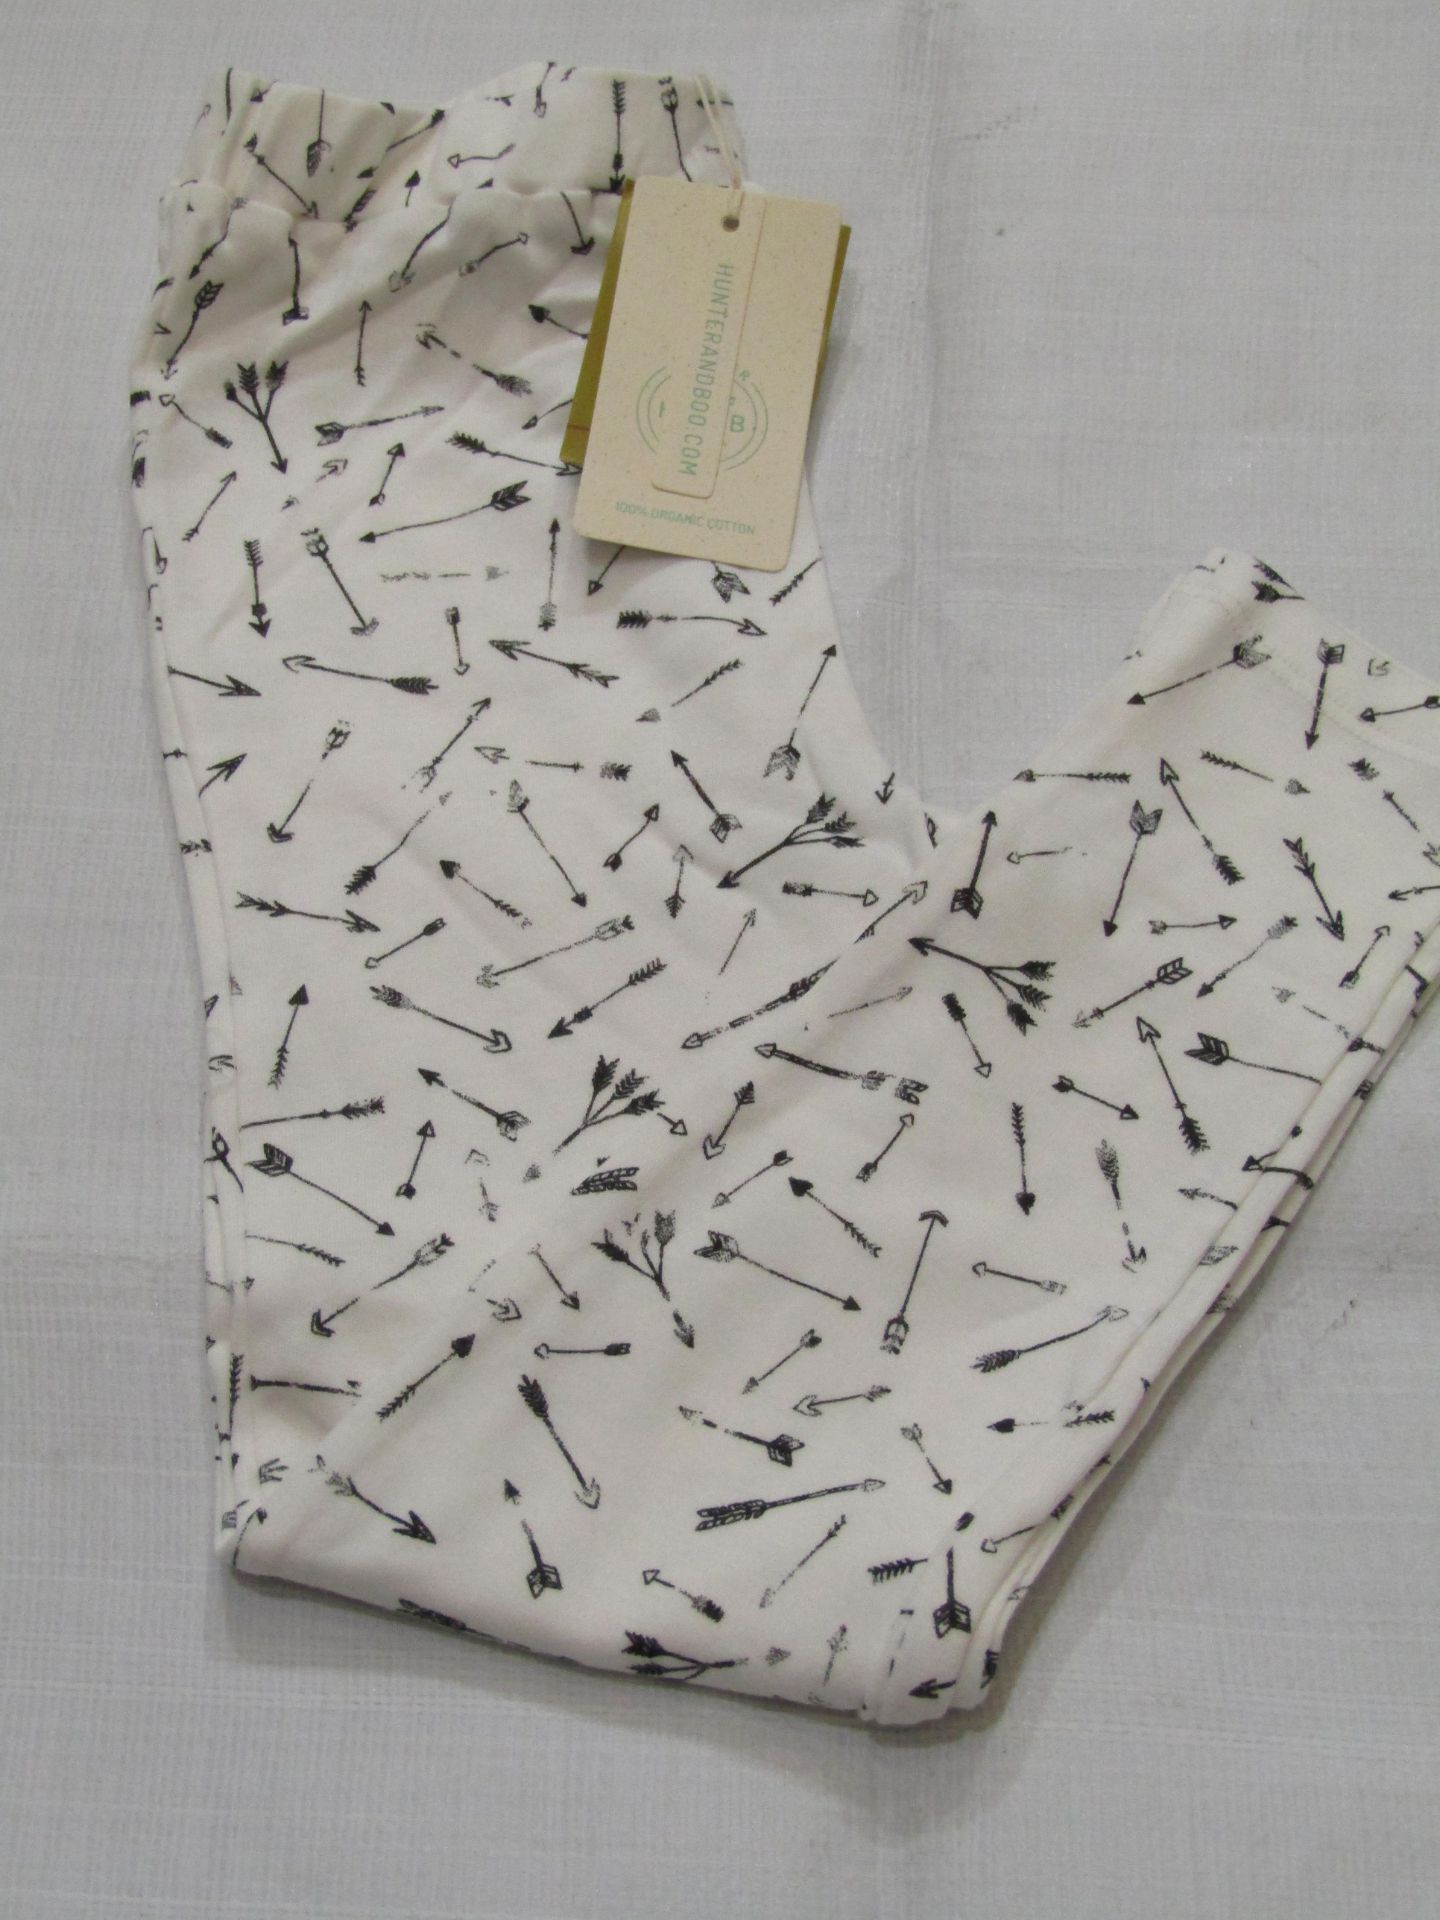 2 X Hunter & Boo Arrow Print Leggings Age 4-5yrs New & Packaged - Image 2 of 2